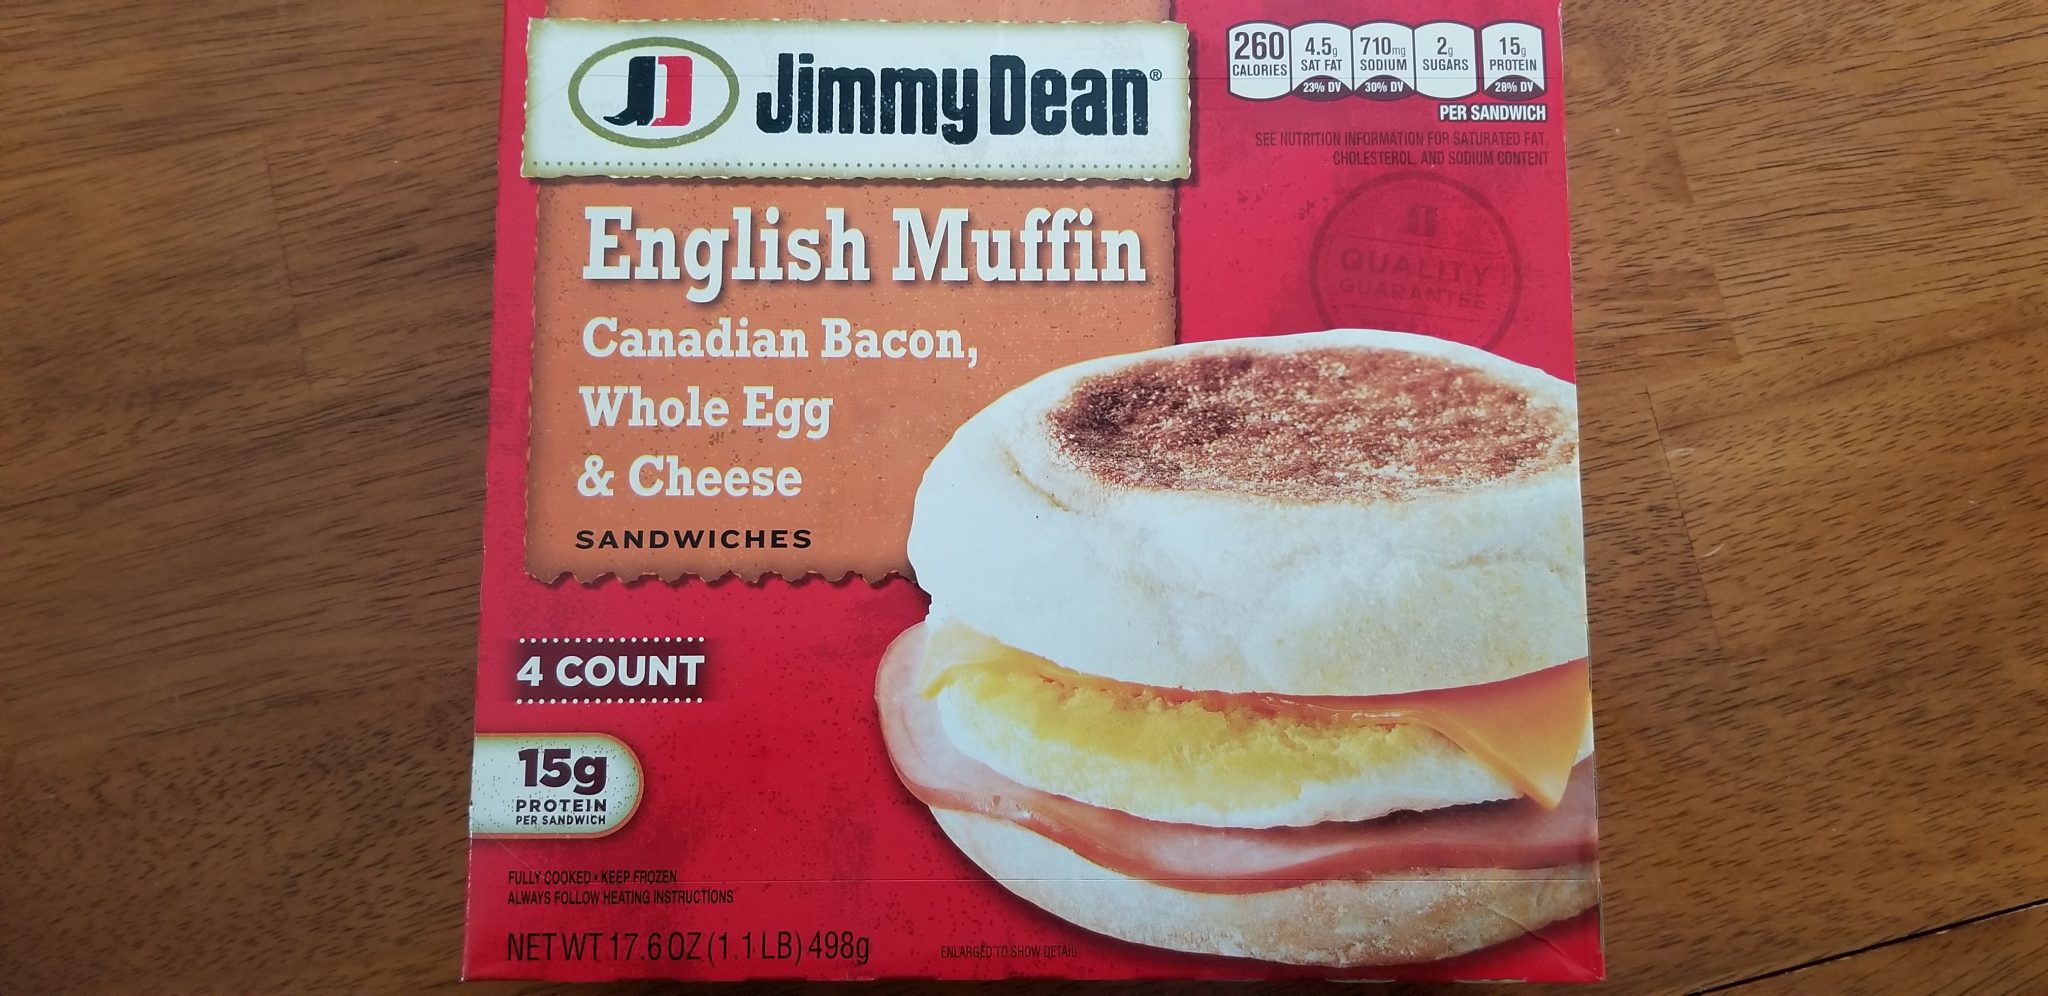 Jimmy Dean English Muffin with Canadian Bacon, Whole Egg & Cheese